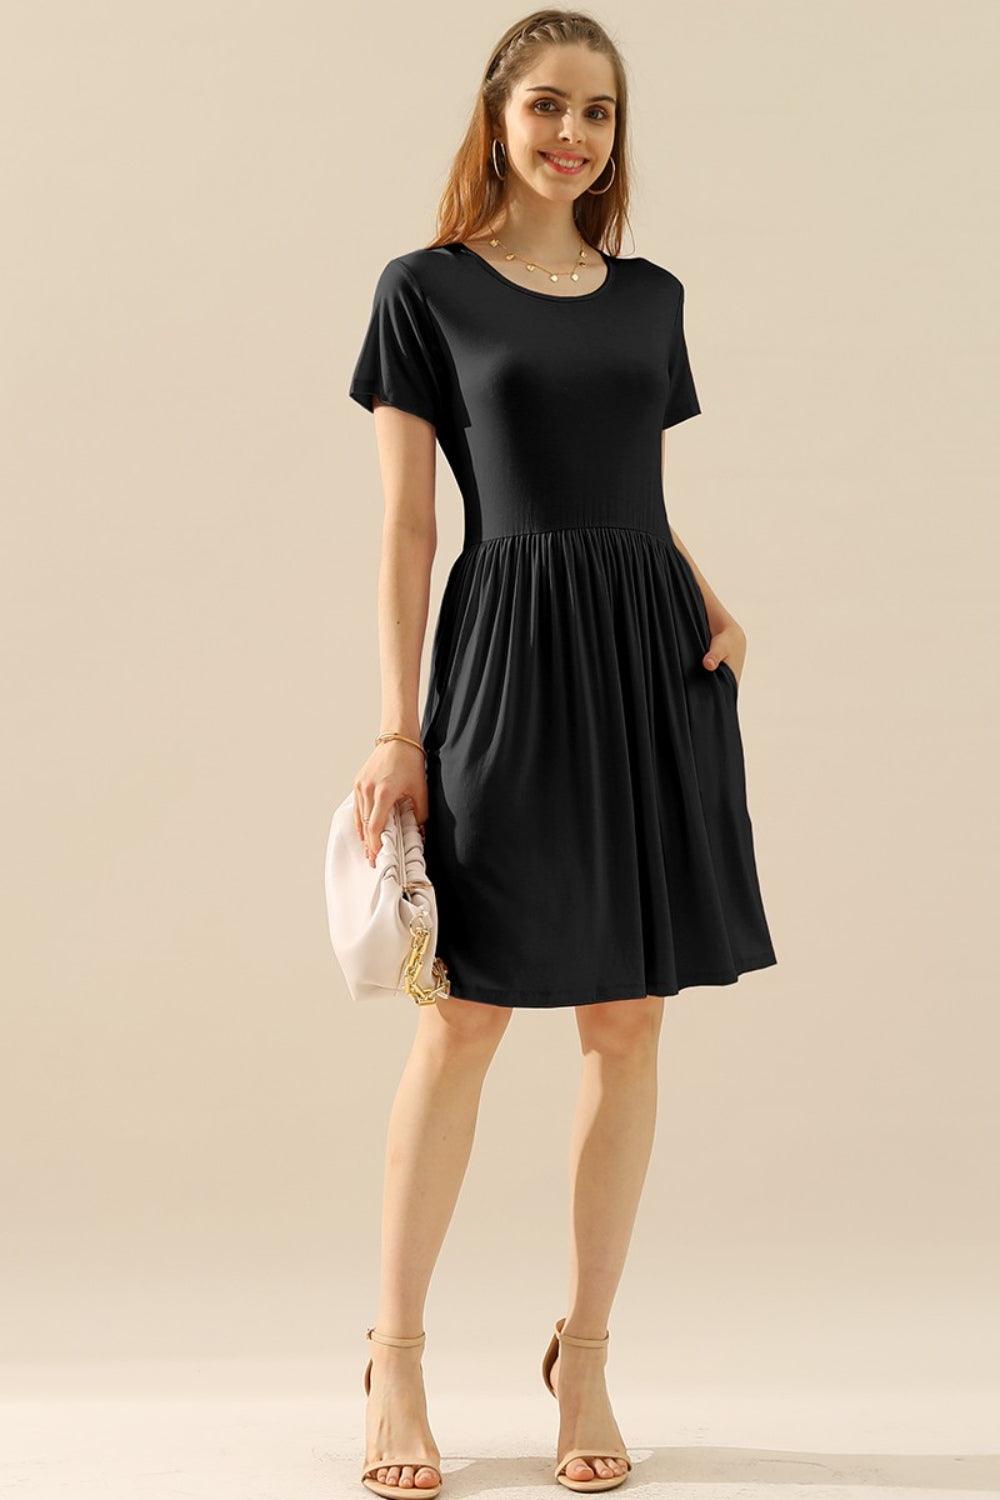 Ninexis Full Size Round Neck Ruched Dress with Pockets - Anchored Feather Boutique